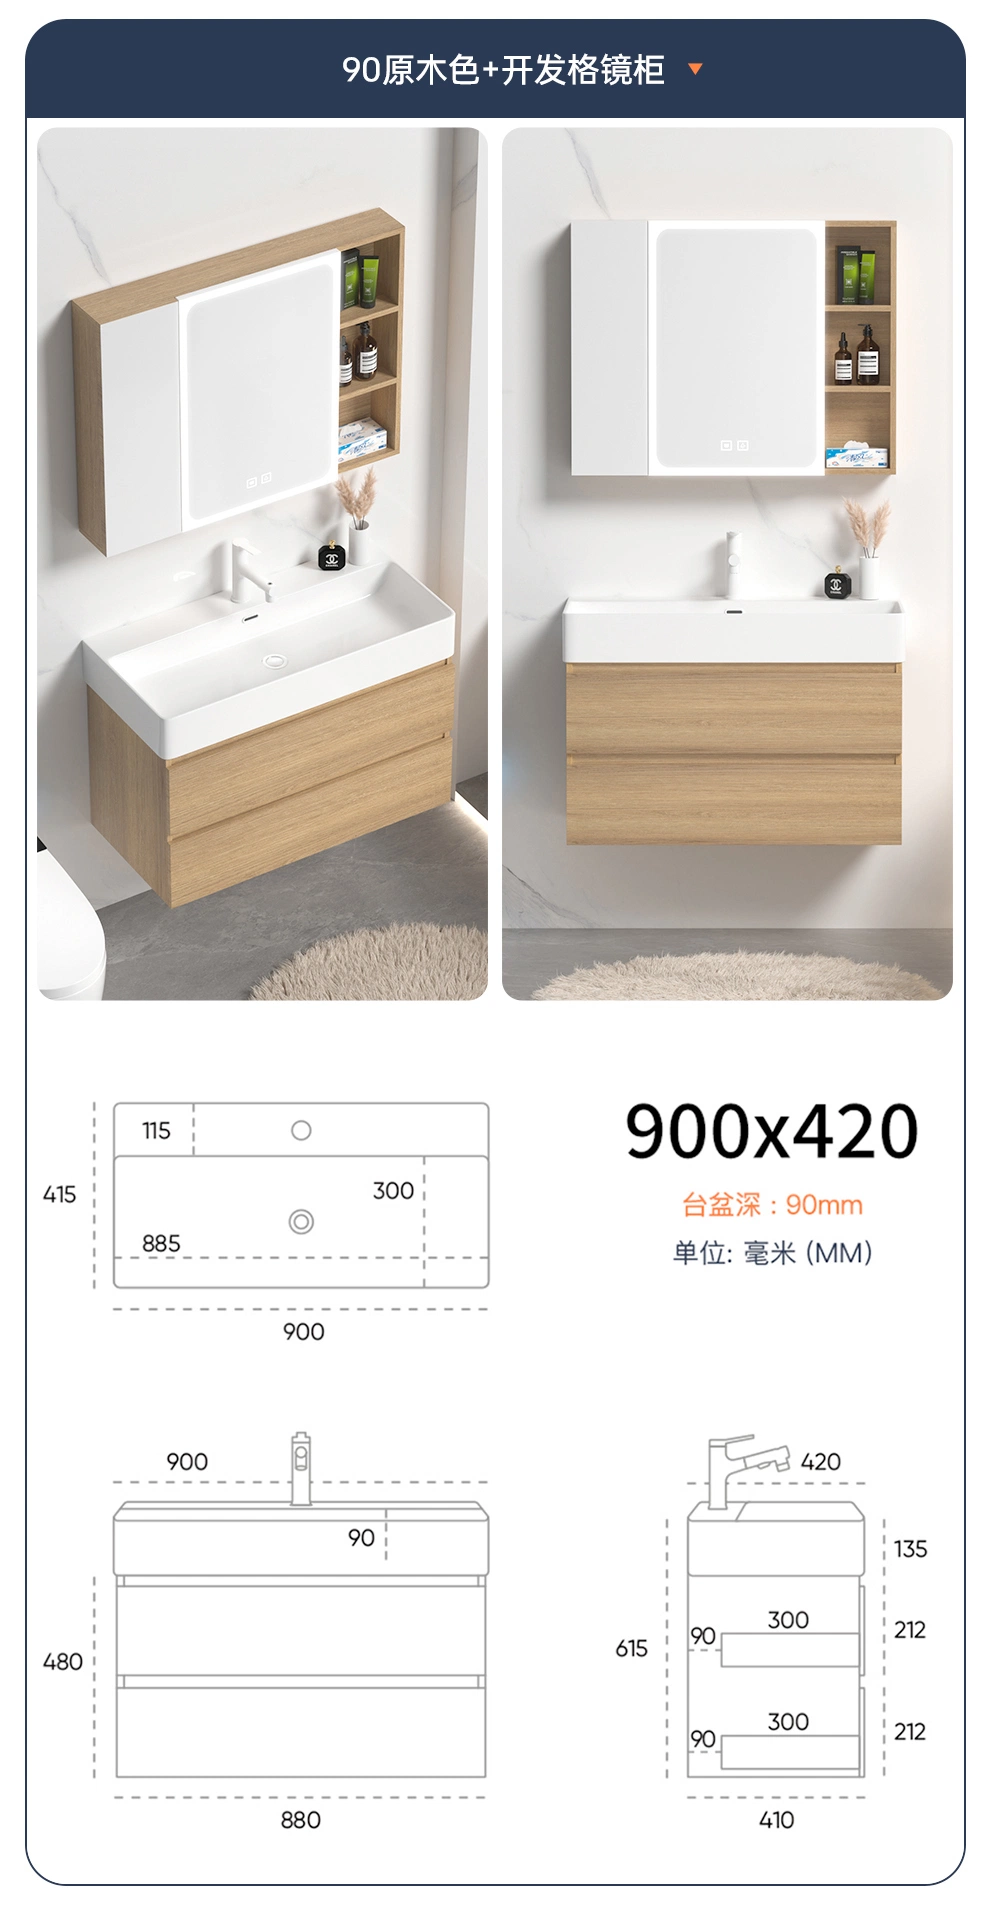 Burlywood Color Bathroom Luxury Cabinets with Ceramic Basin Smart Mirror 50~100mm Size Wall Hung Mounted Bathroom Cabinet